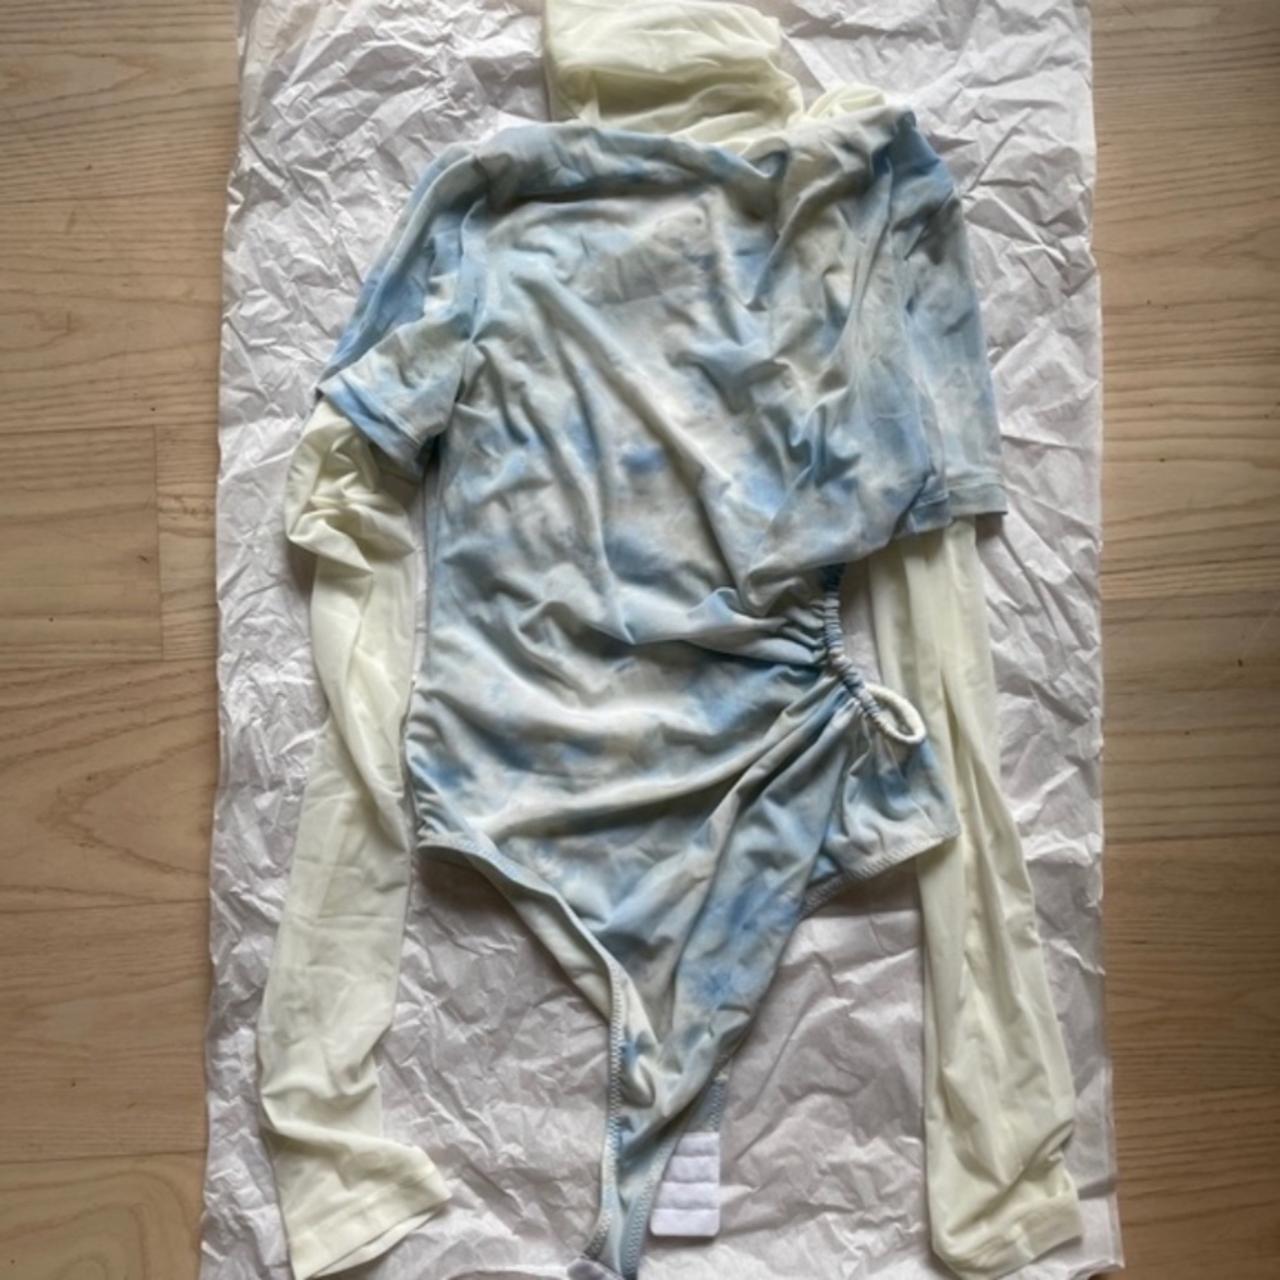 Product Image 3 - Off-White Cloud Tie-Dye Layered Bodysuit

Worn